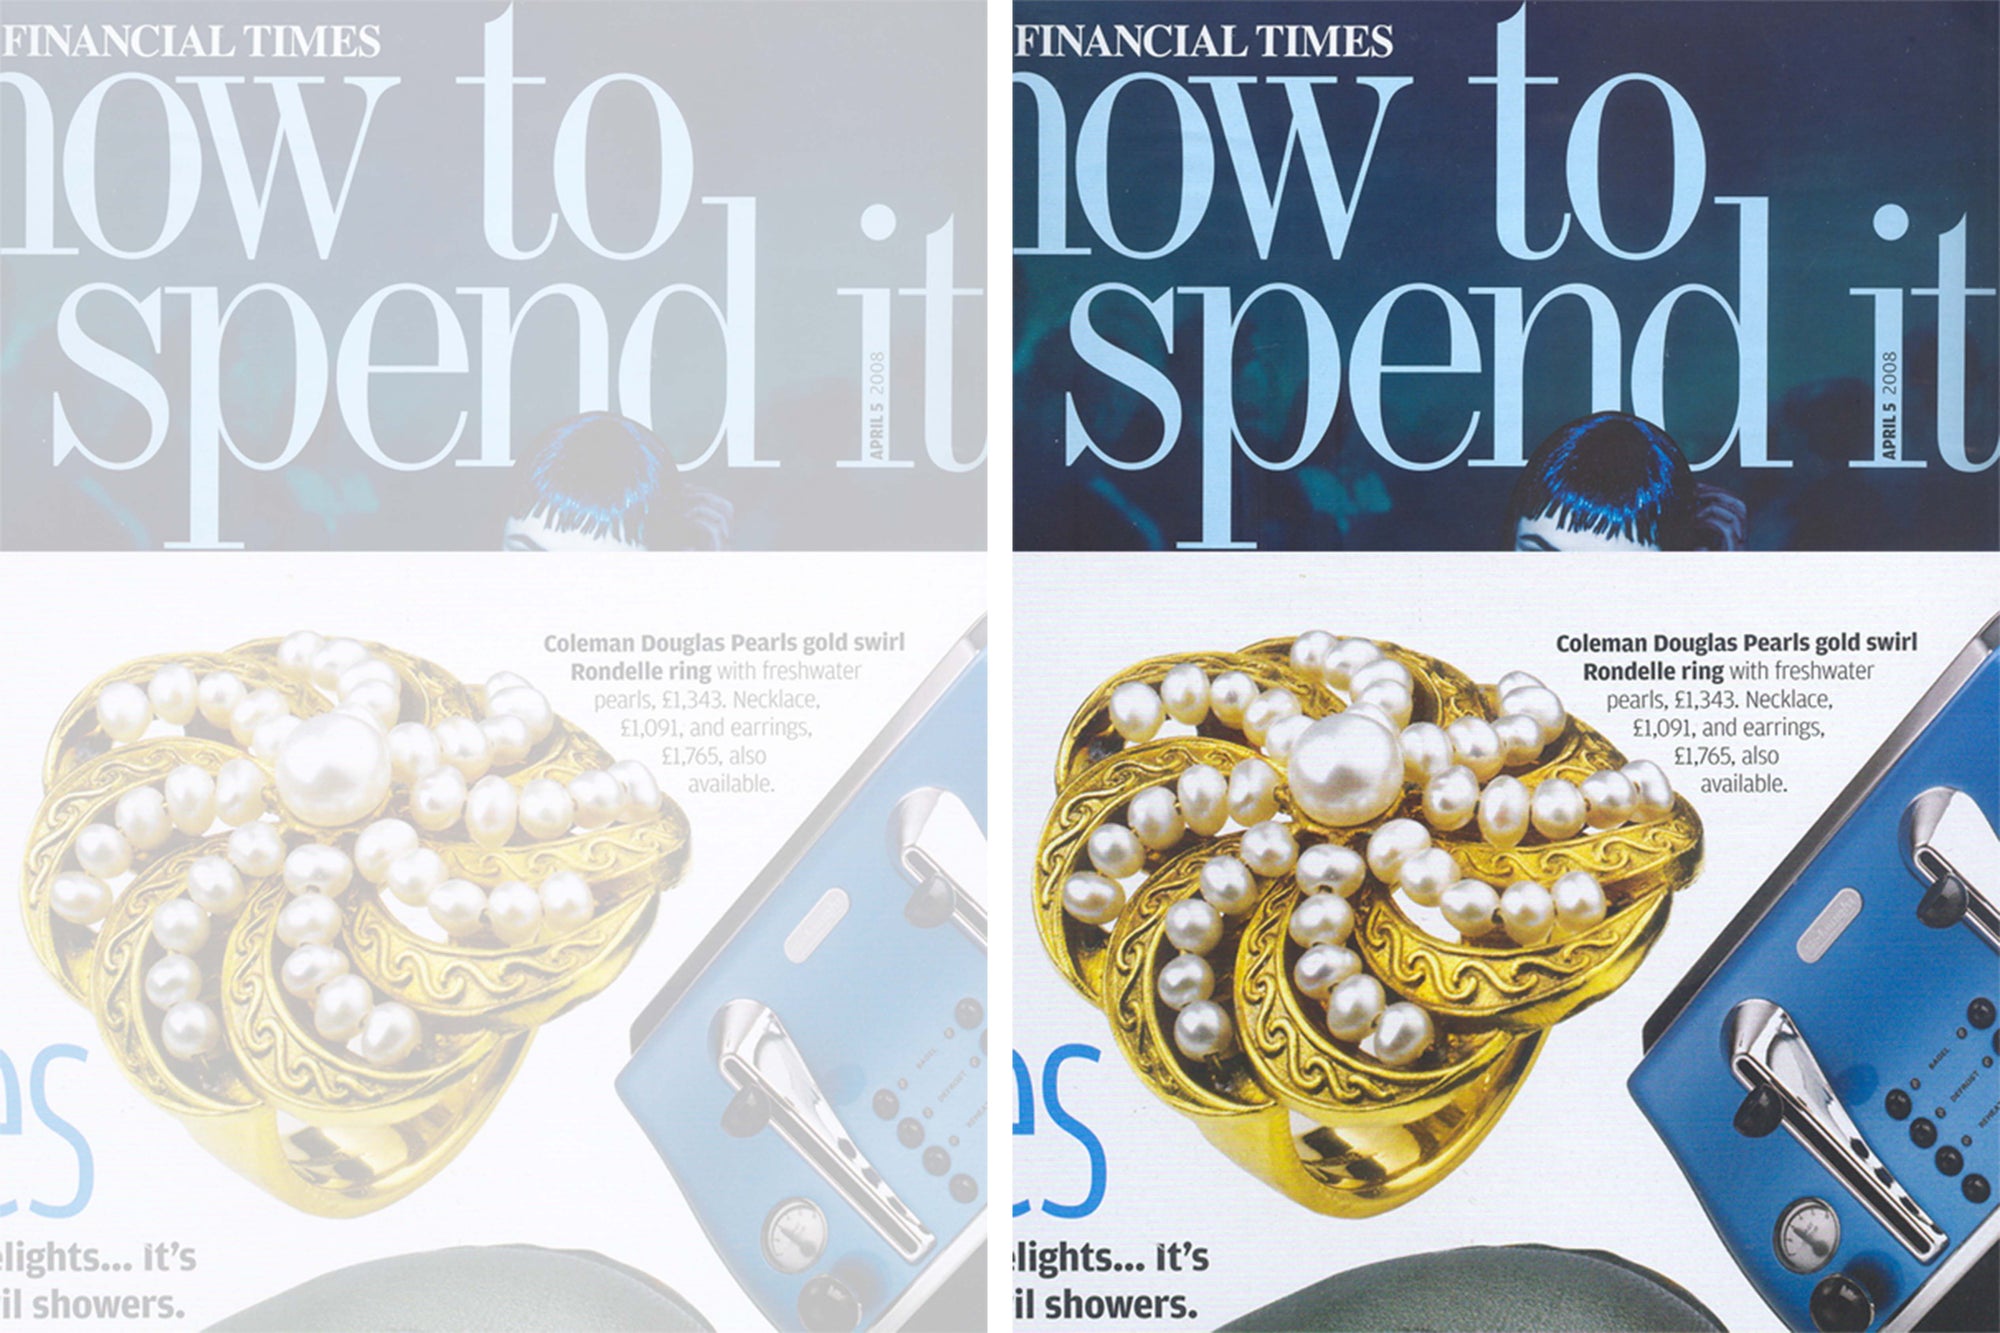 FT - How To Spend It